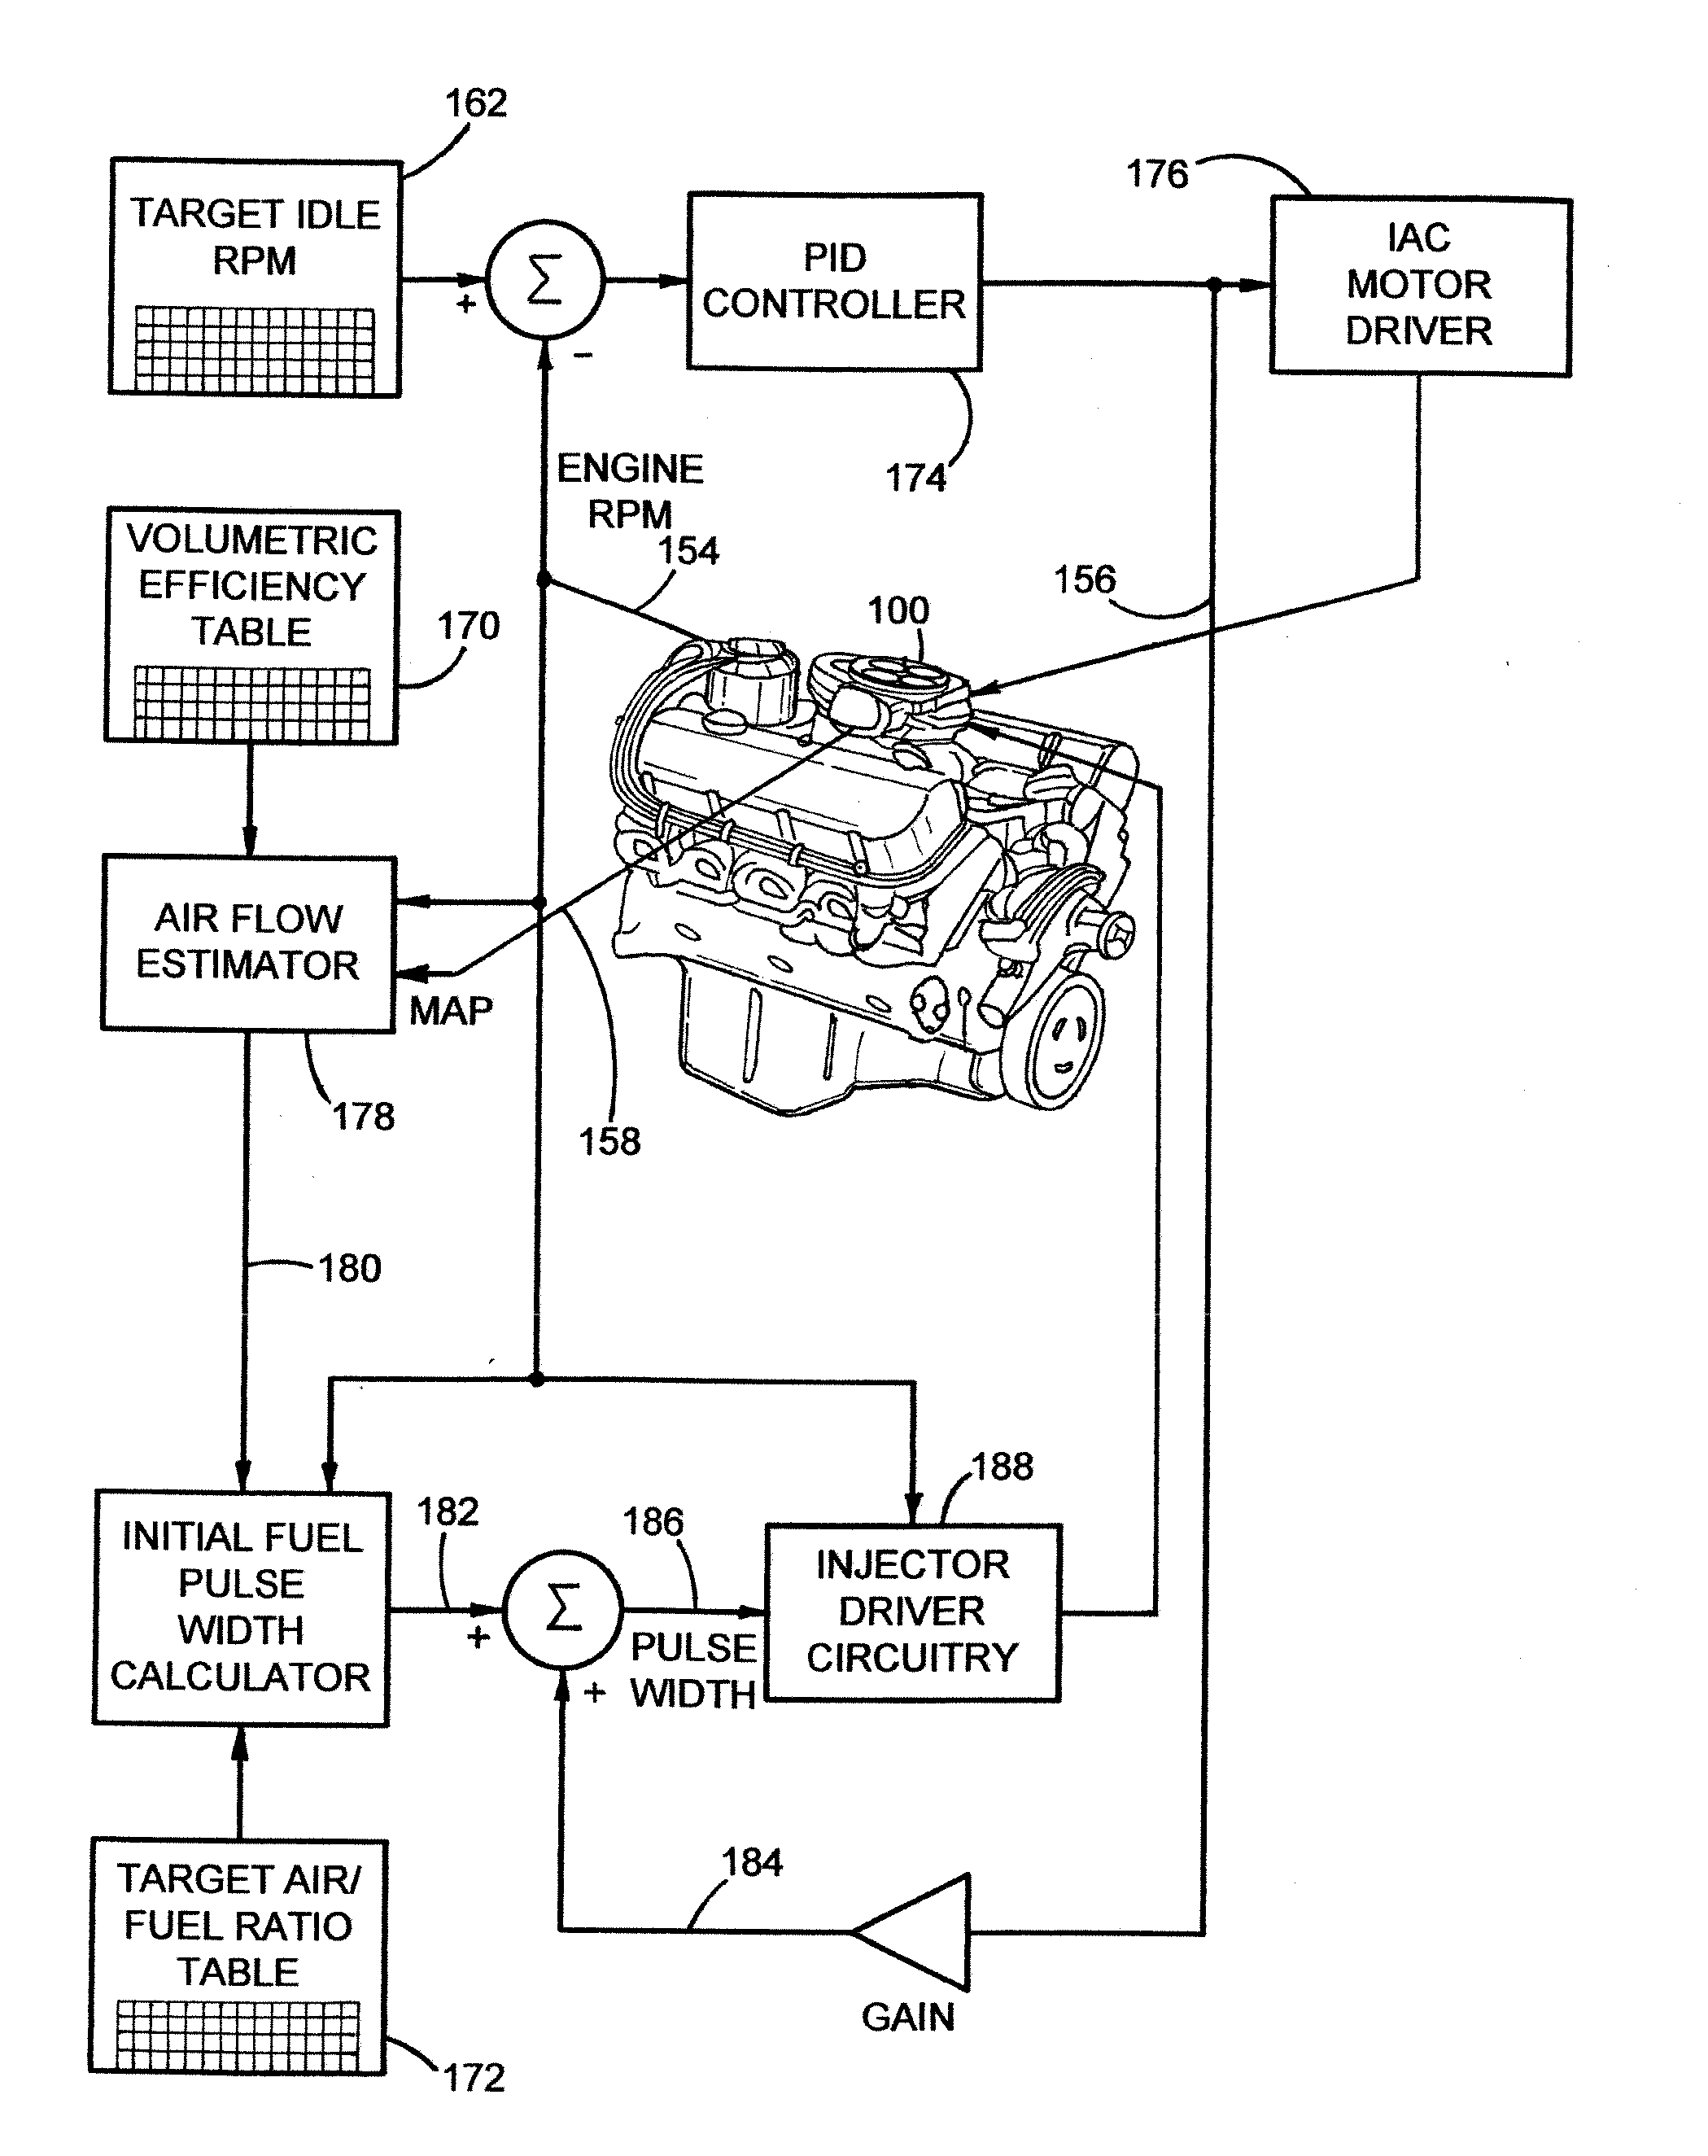 Throttle body fuel injection system with improved idle air control